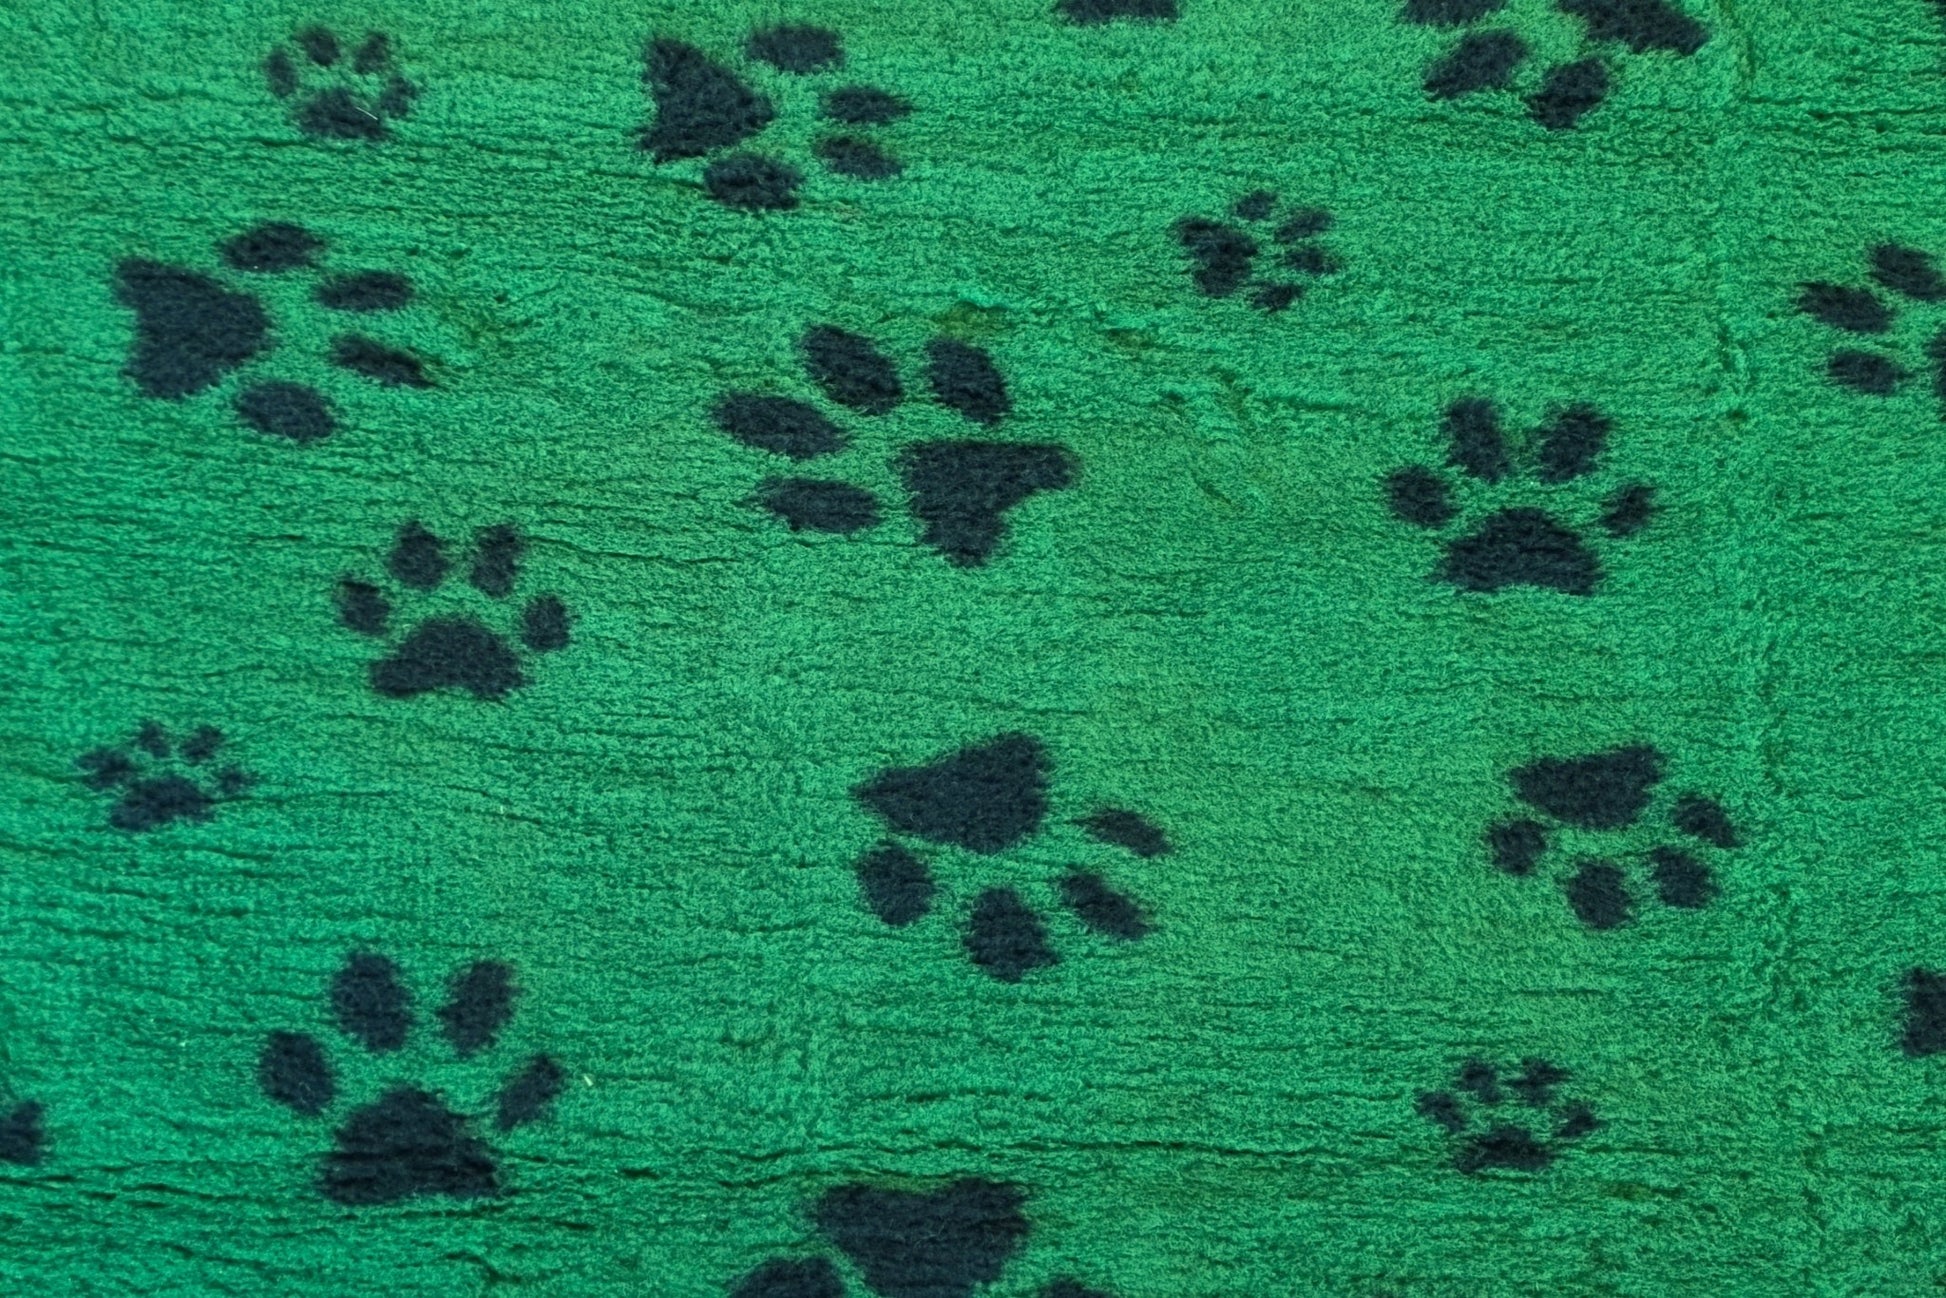 Vet Bed - Green Backed - Moss Green with Black Designer Paws